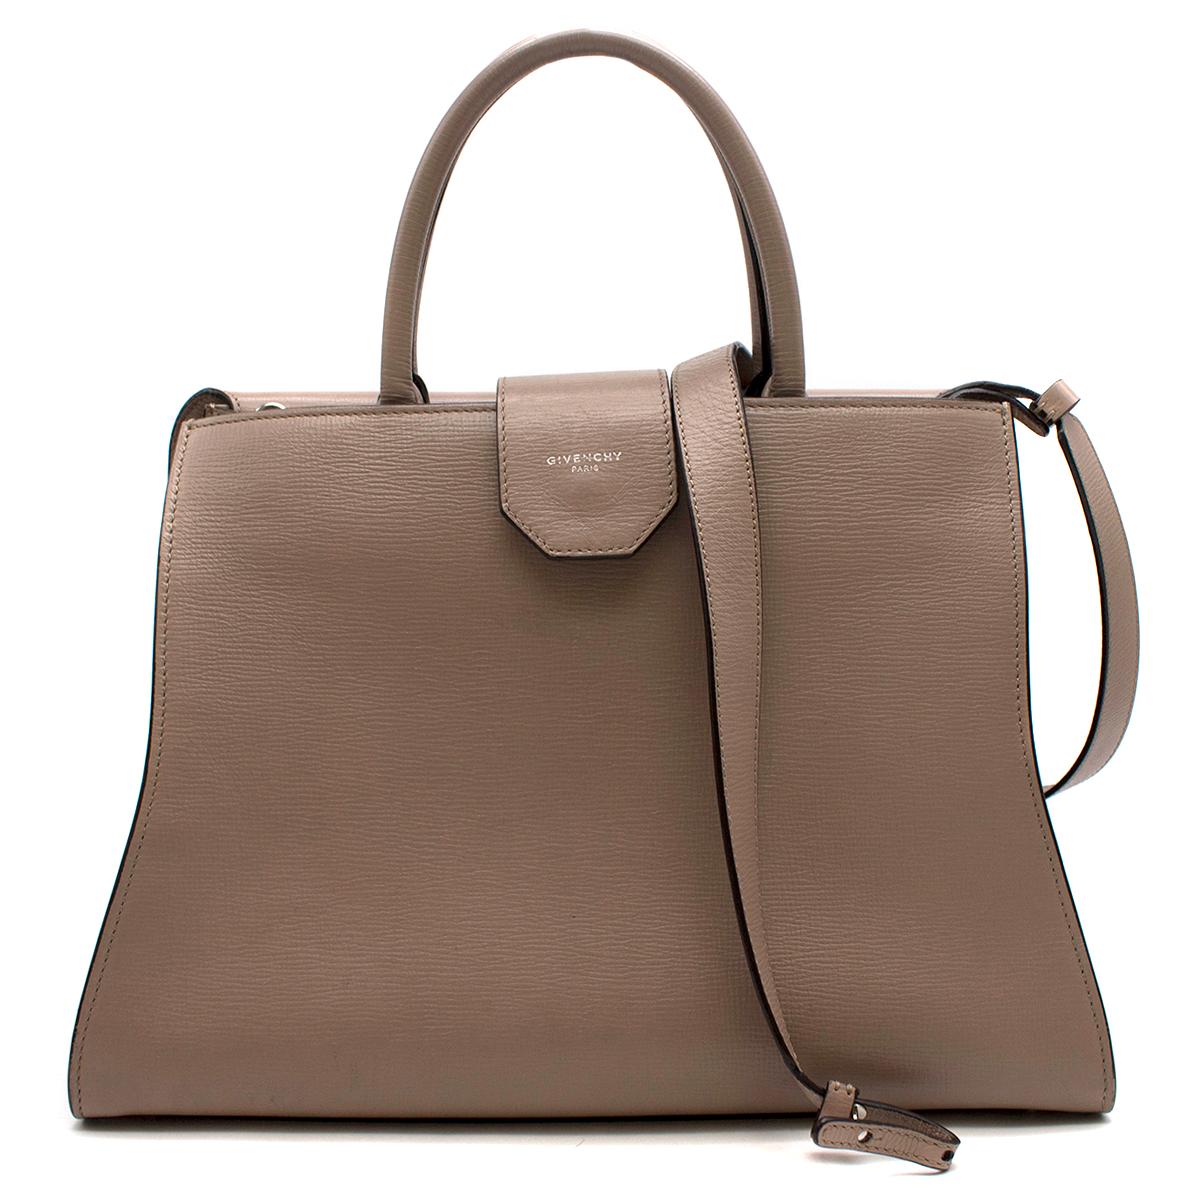 Givenchy Medium Taupe Obsedia Satchel

- Top handle bag in taupe leather 
- Non-removable leather shoulder strap
- The bag can be worn as a top hand bag or on the shoulders
- Two top rounded handles
- Silver-tone hardware
- Soft leather interior